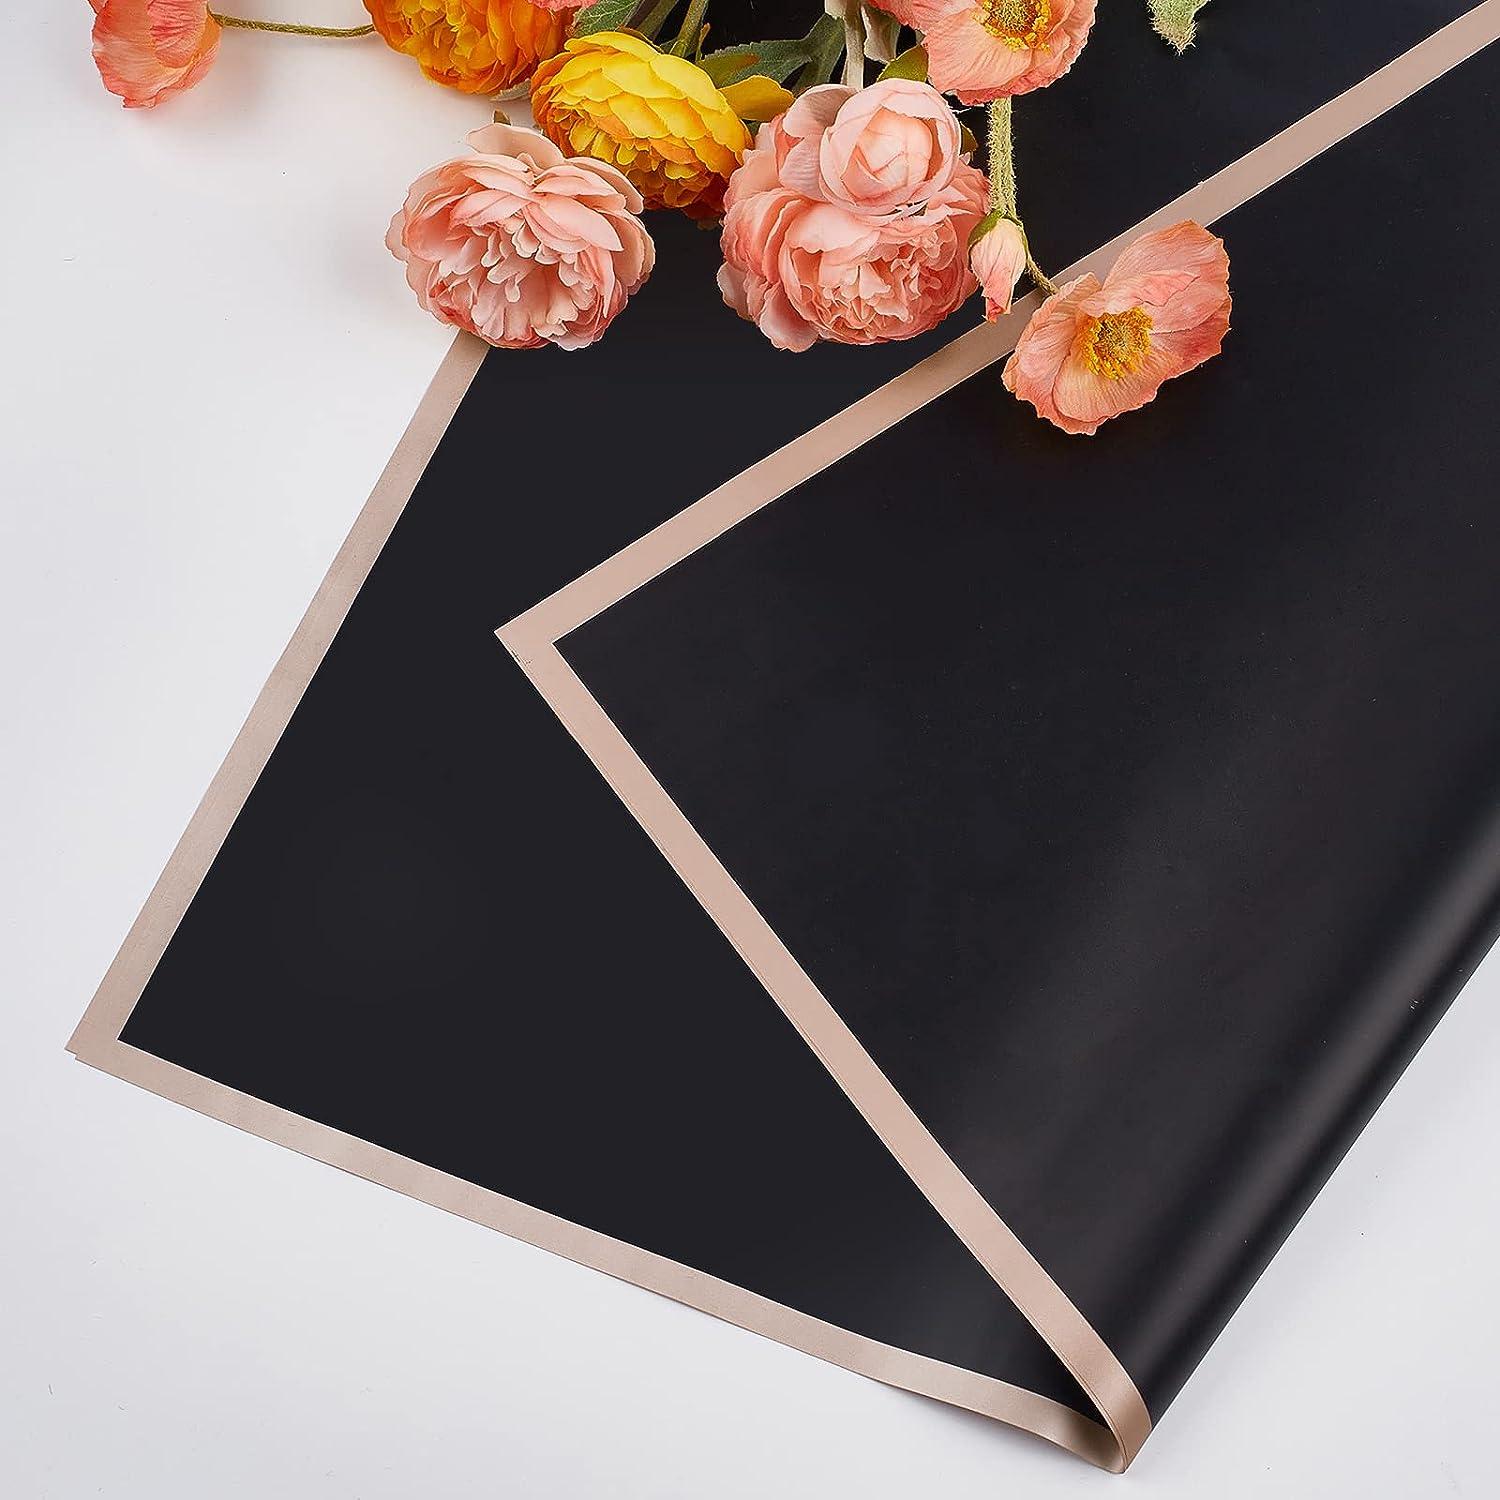 DODXIAOBEUL 20Sheets Phnom Penh Black Flower Wrapping Paper,Waterproof  Florist Bouquet Paper,Use for Floral Wraps christmas gift wrapping  paper,23x23